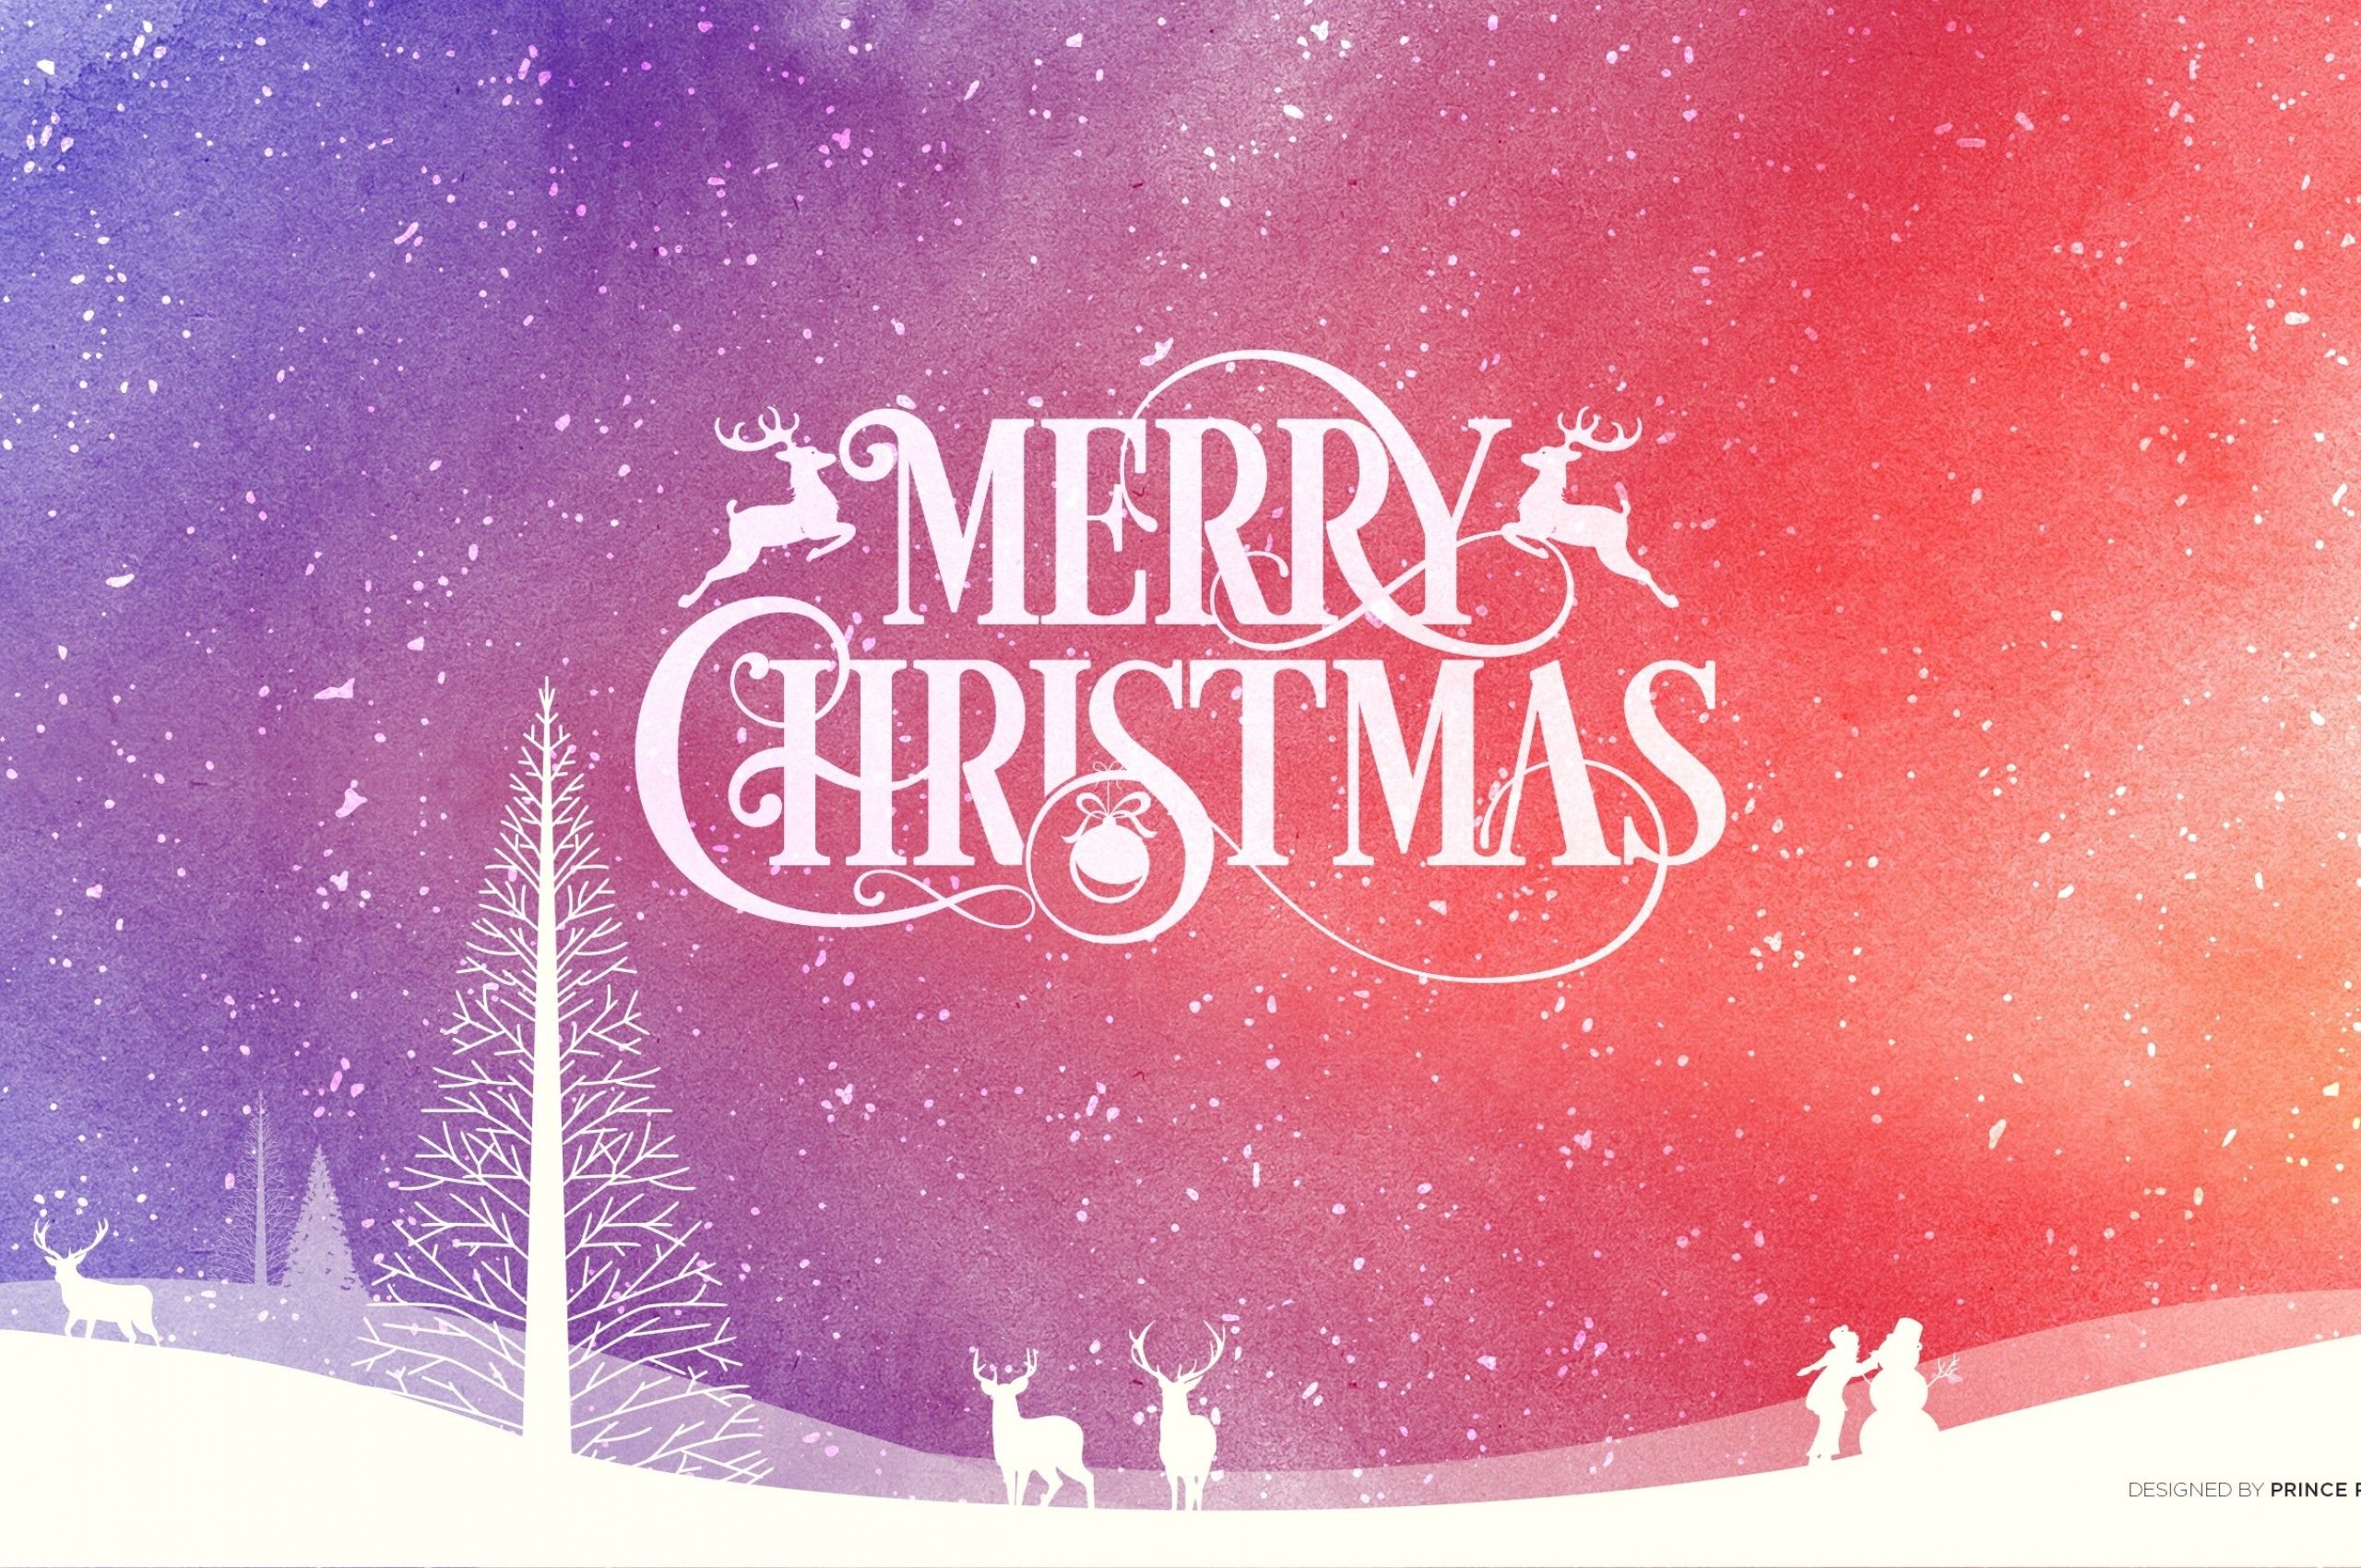 Download 2560x1700 Merry Christmas, Deer, Graphic Design Wallpapers for Chromebook Pixel